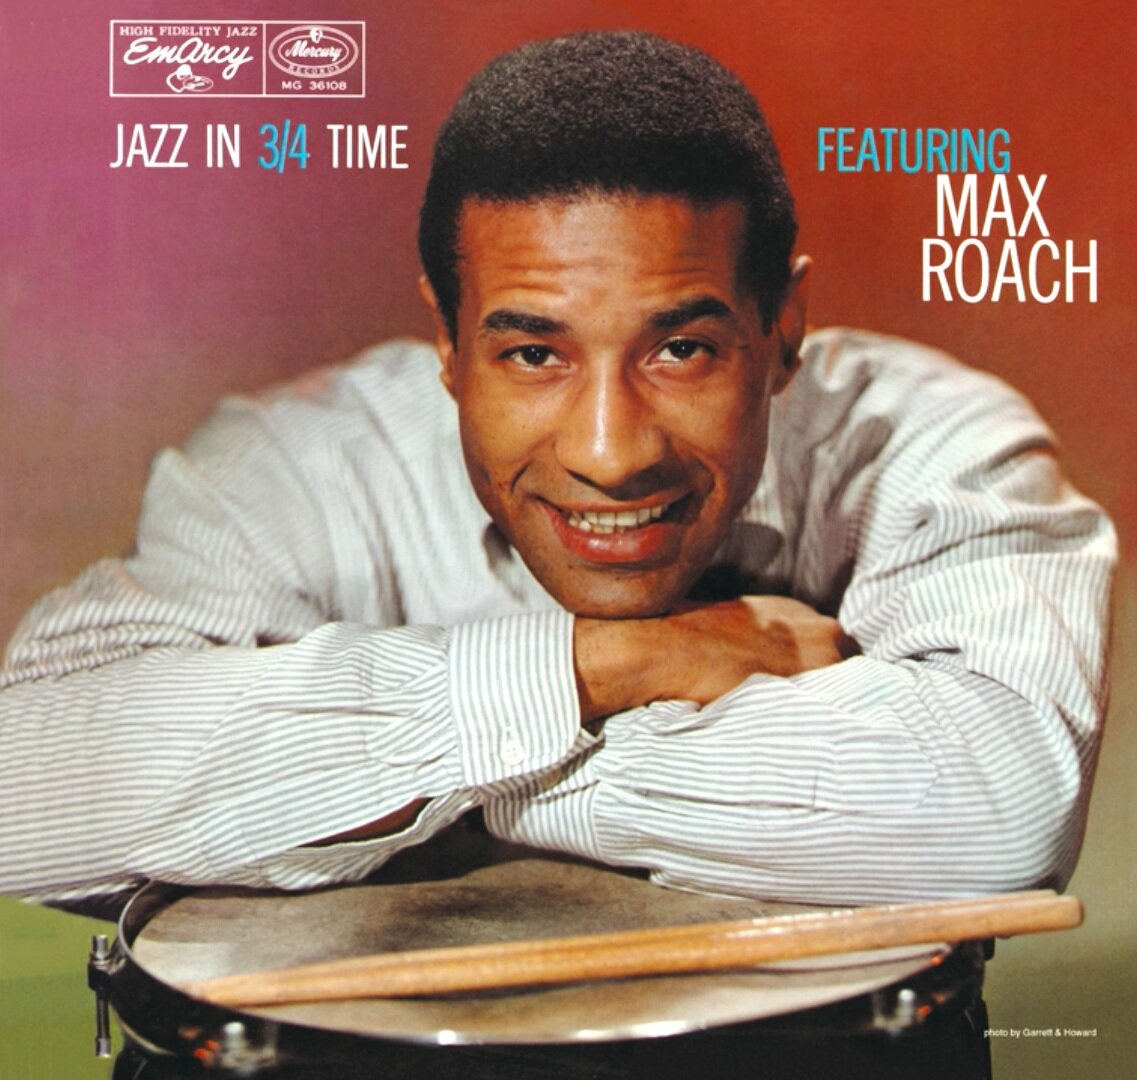 Max Roach — Jazz in 3/4 Time (1957)